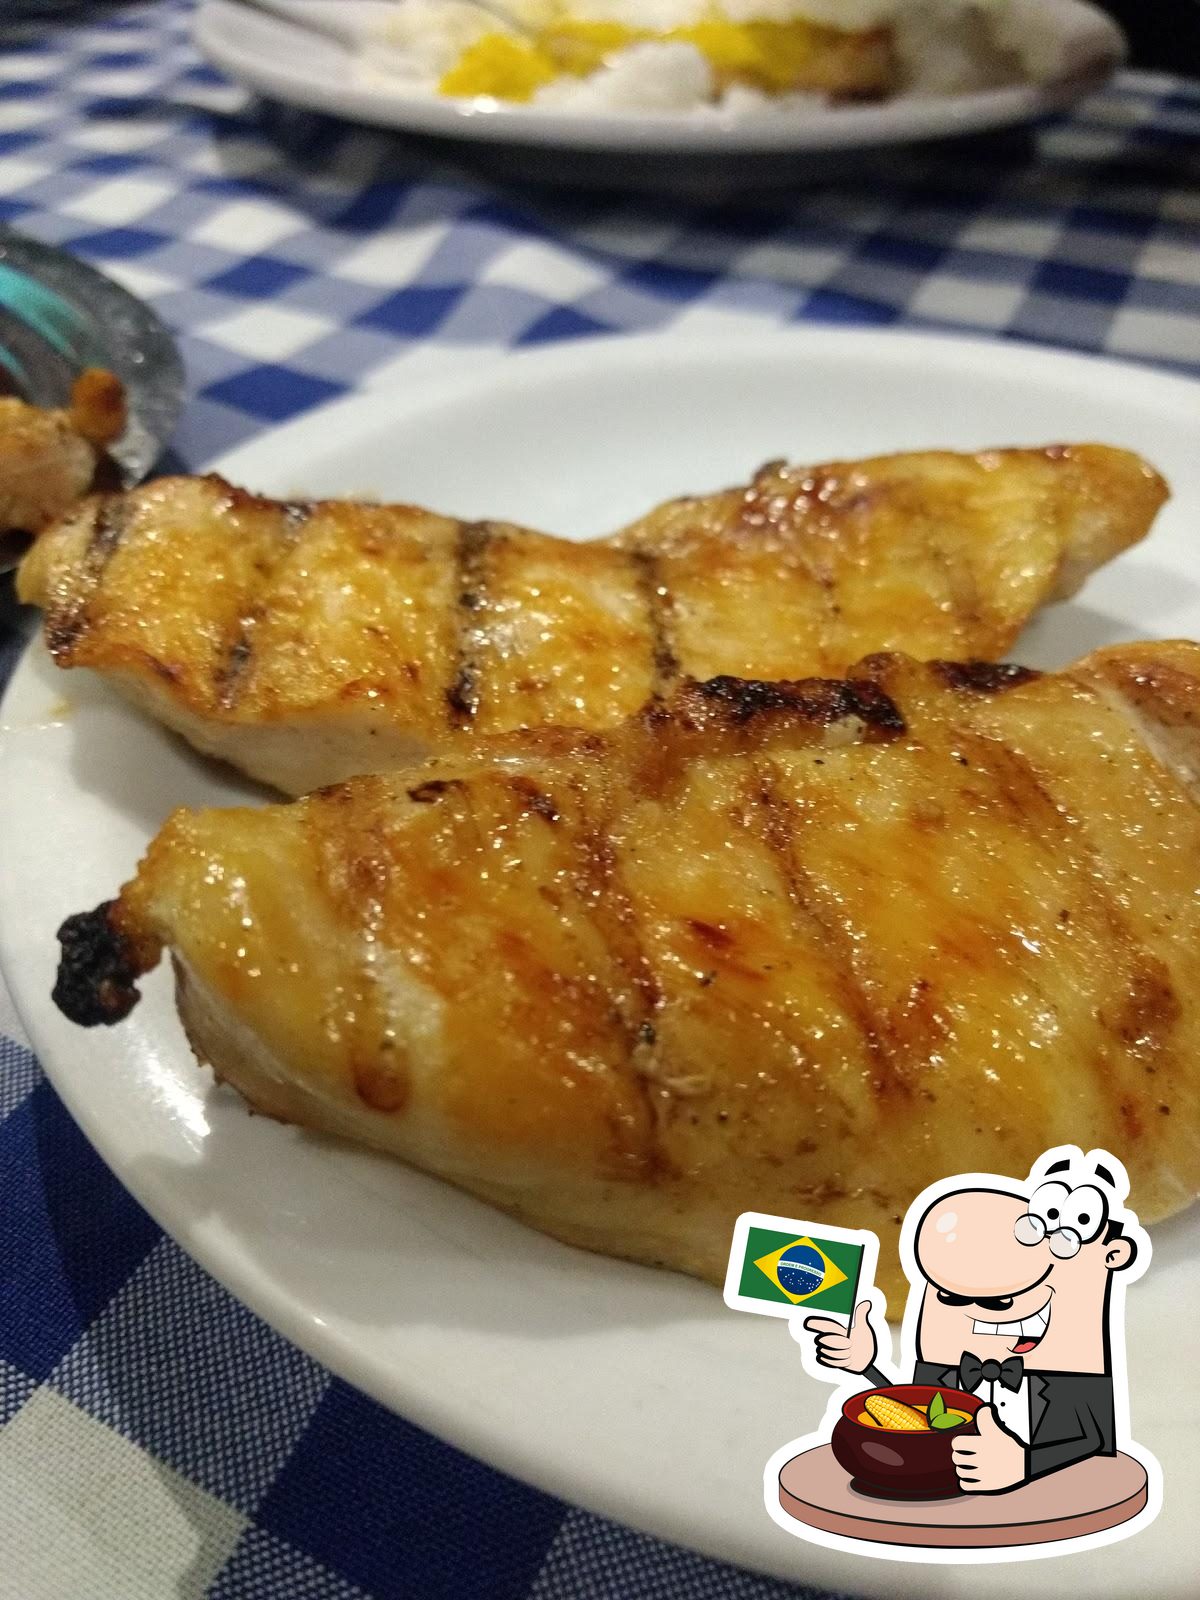 Ikaro's Grill restaurant, Fortaleza, R. André Chaves - Restaurant reviews